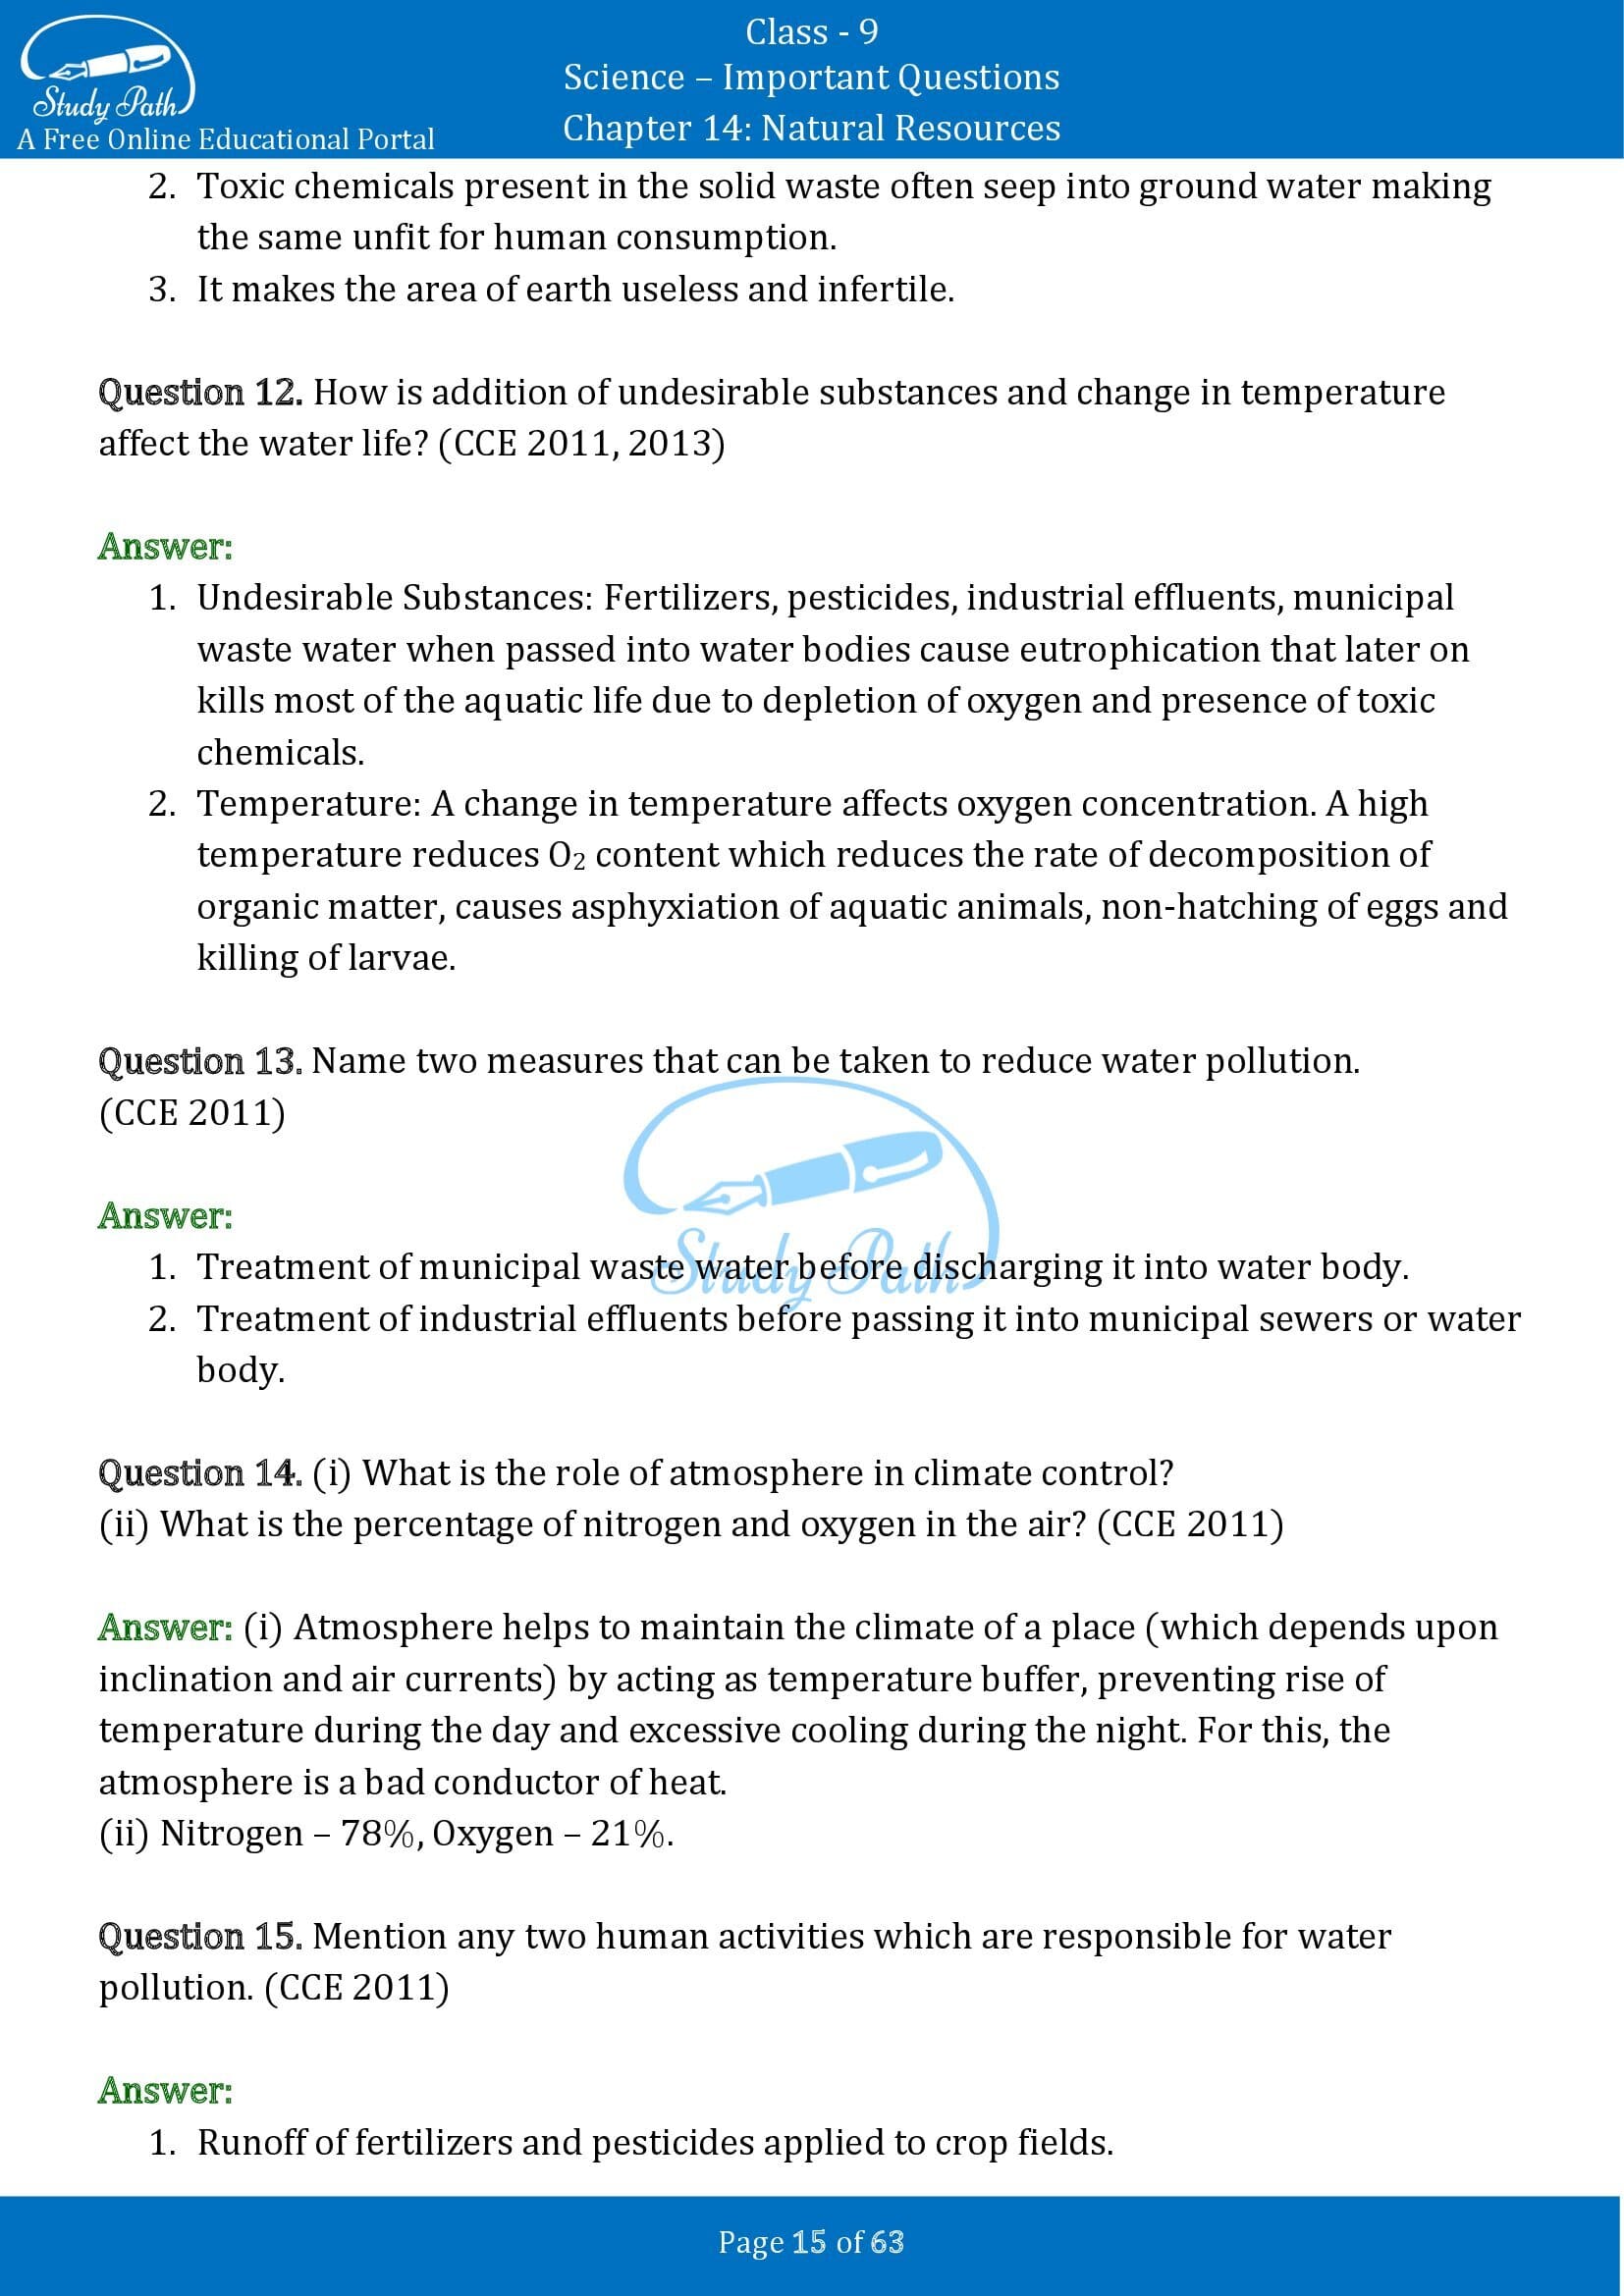 Important Questions for Class 9 Science Chapter 14 Natural Resources 00015